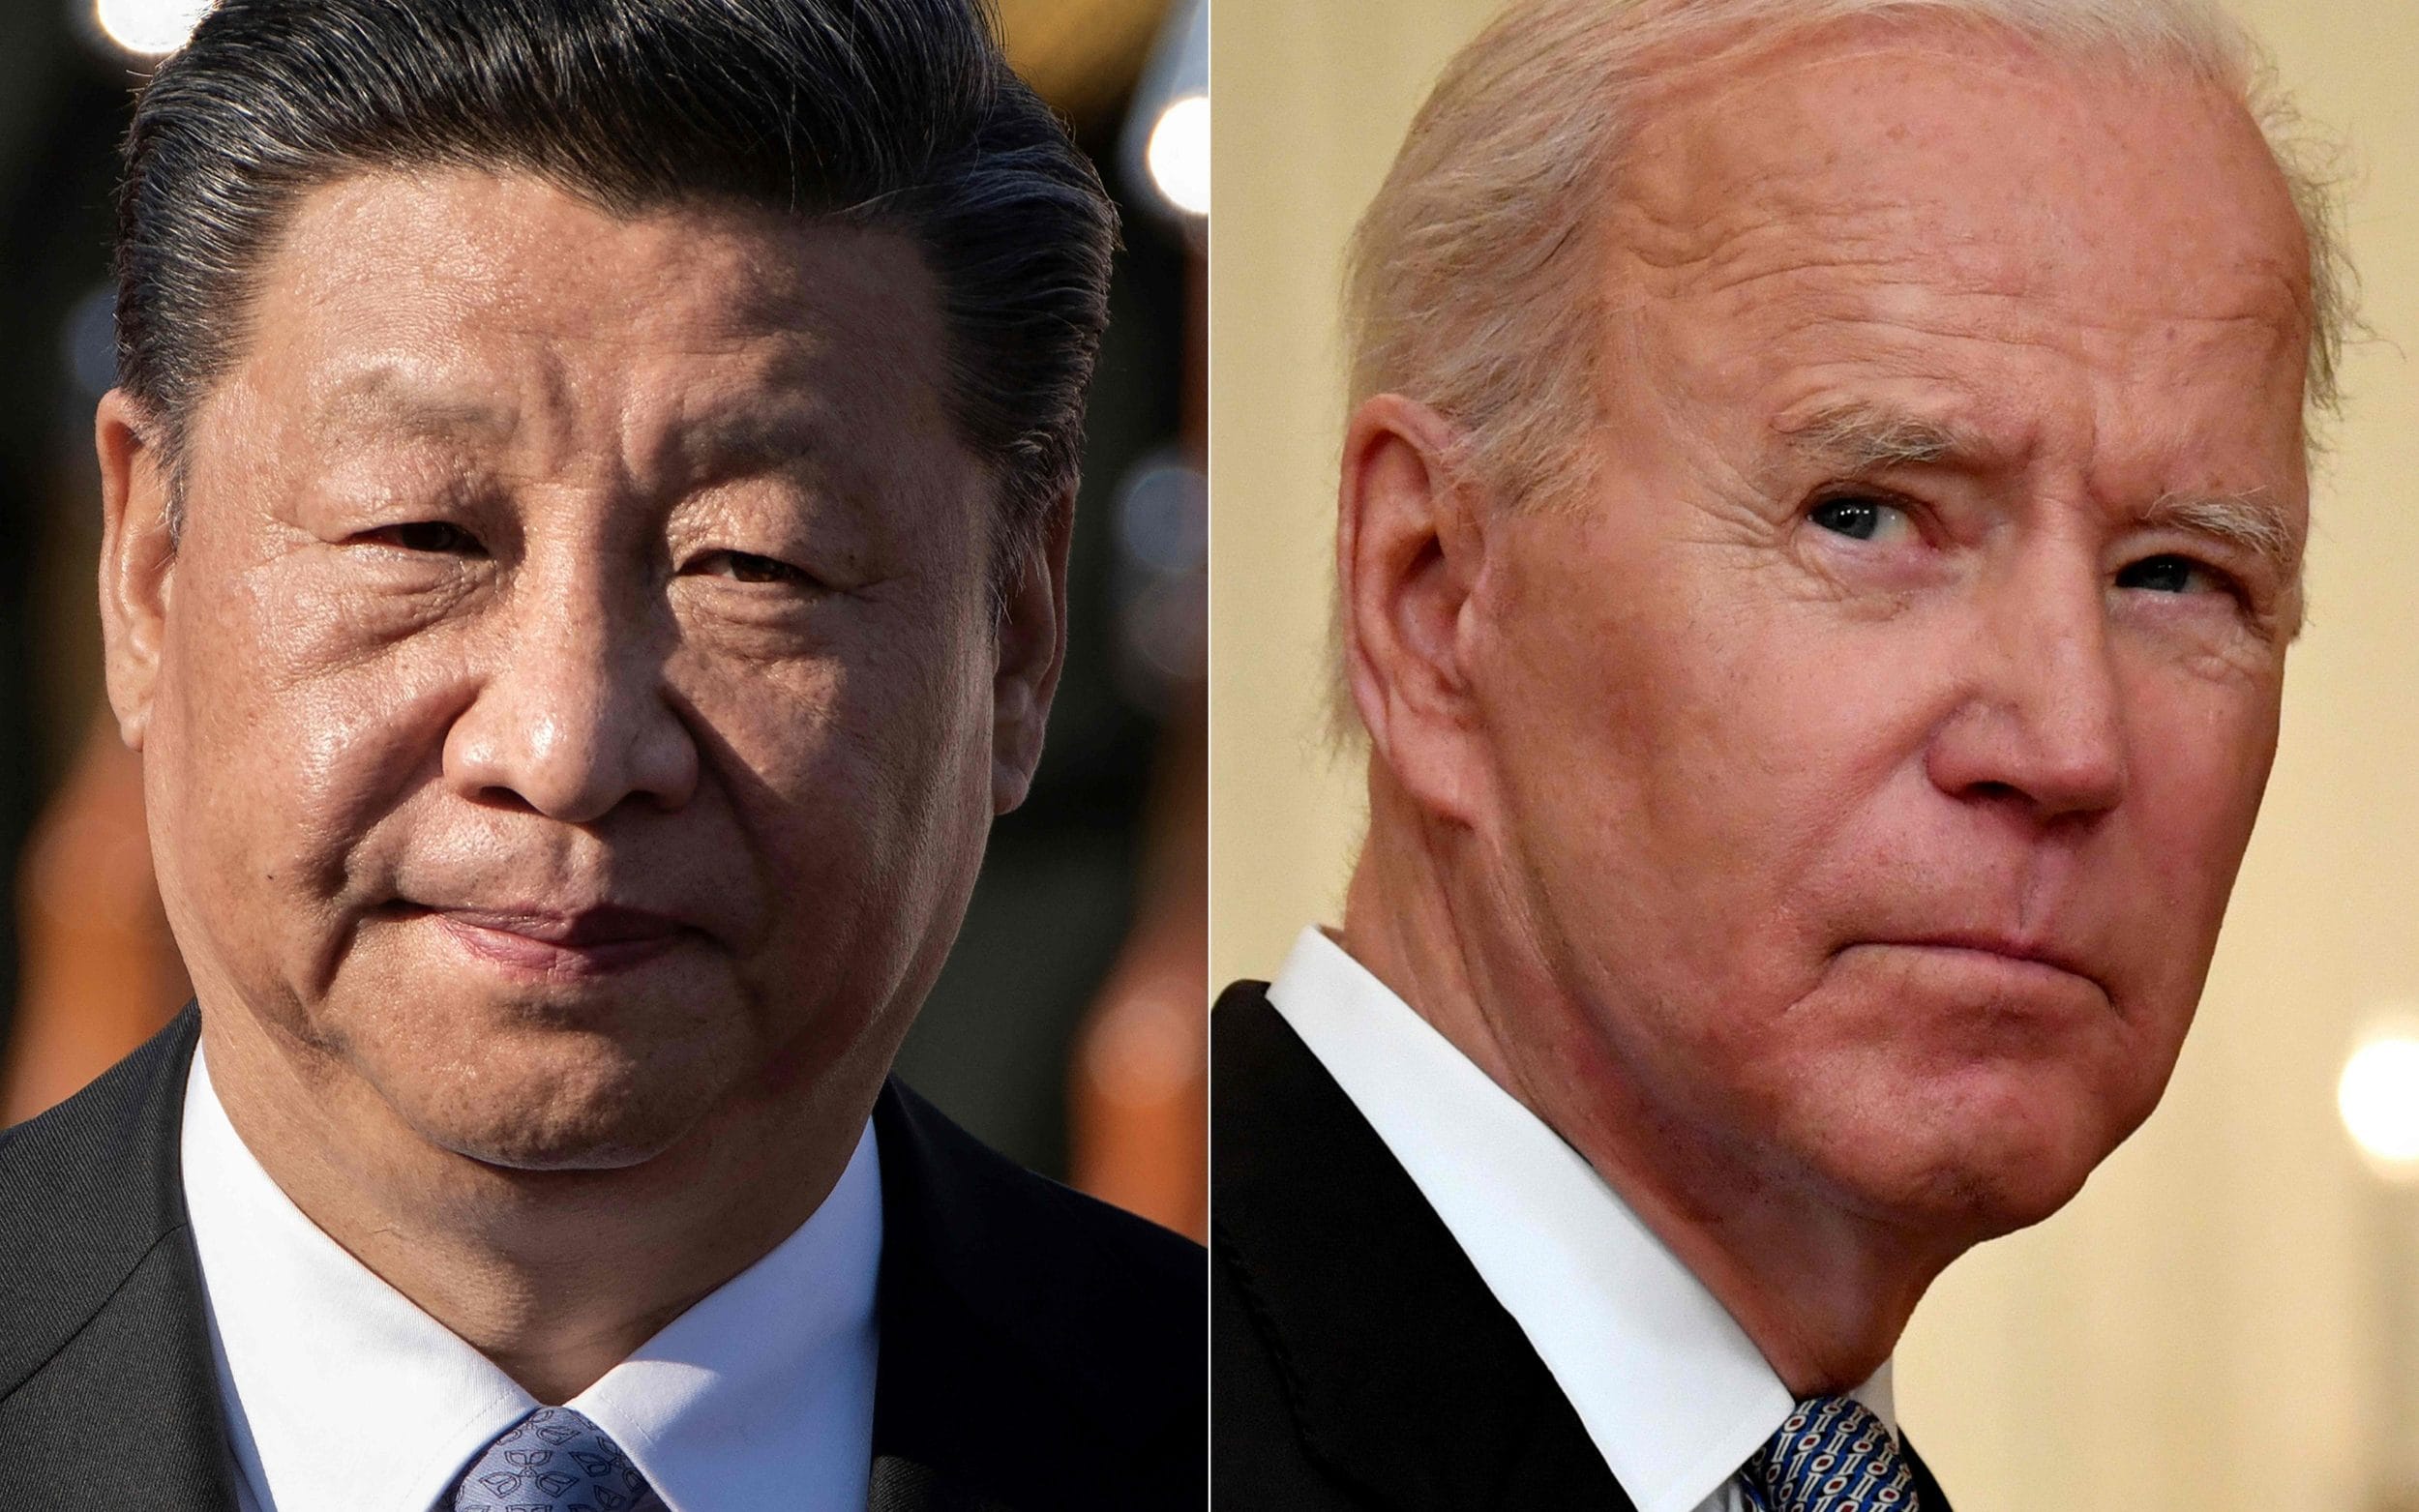 President Biden says he hopes to meet with China’s President Xi Jinping to discuss growing tensions between Washington and Beijing over the self-ruled island of Taiwan.